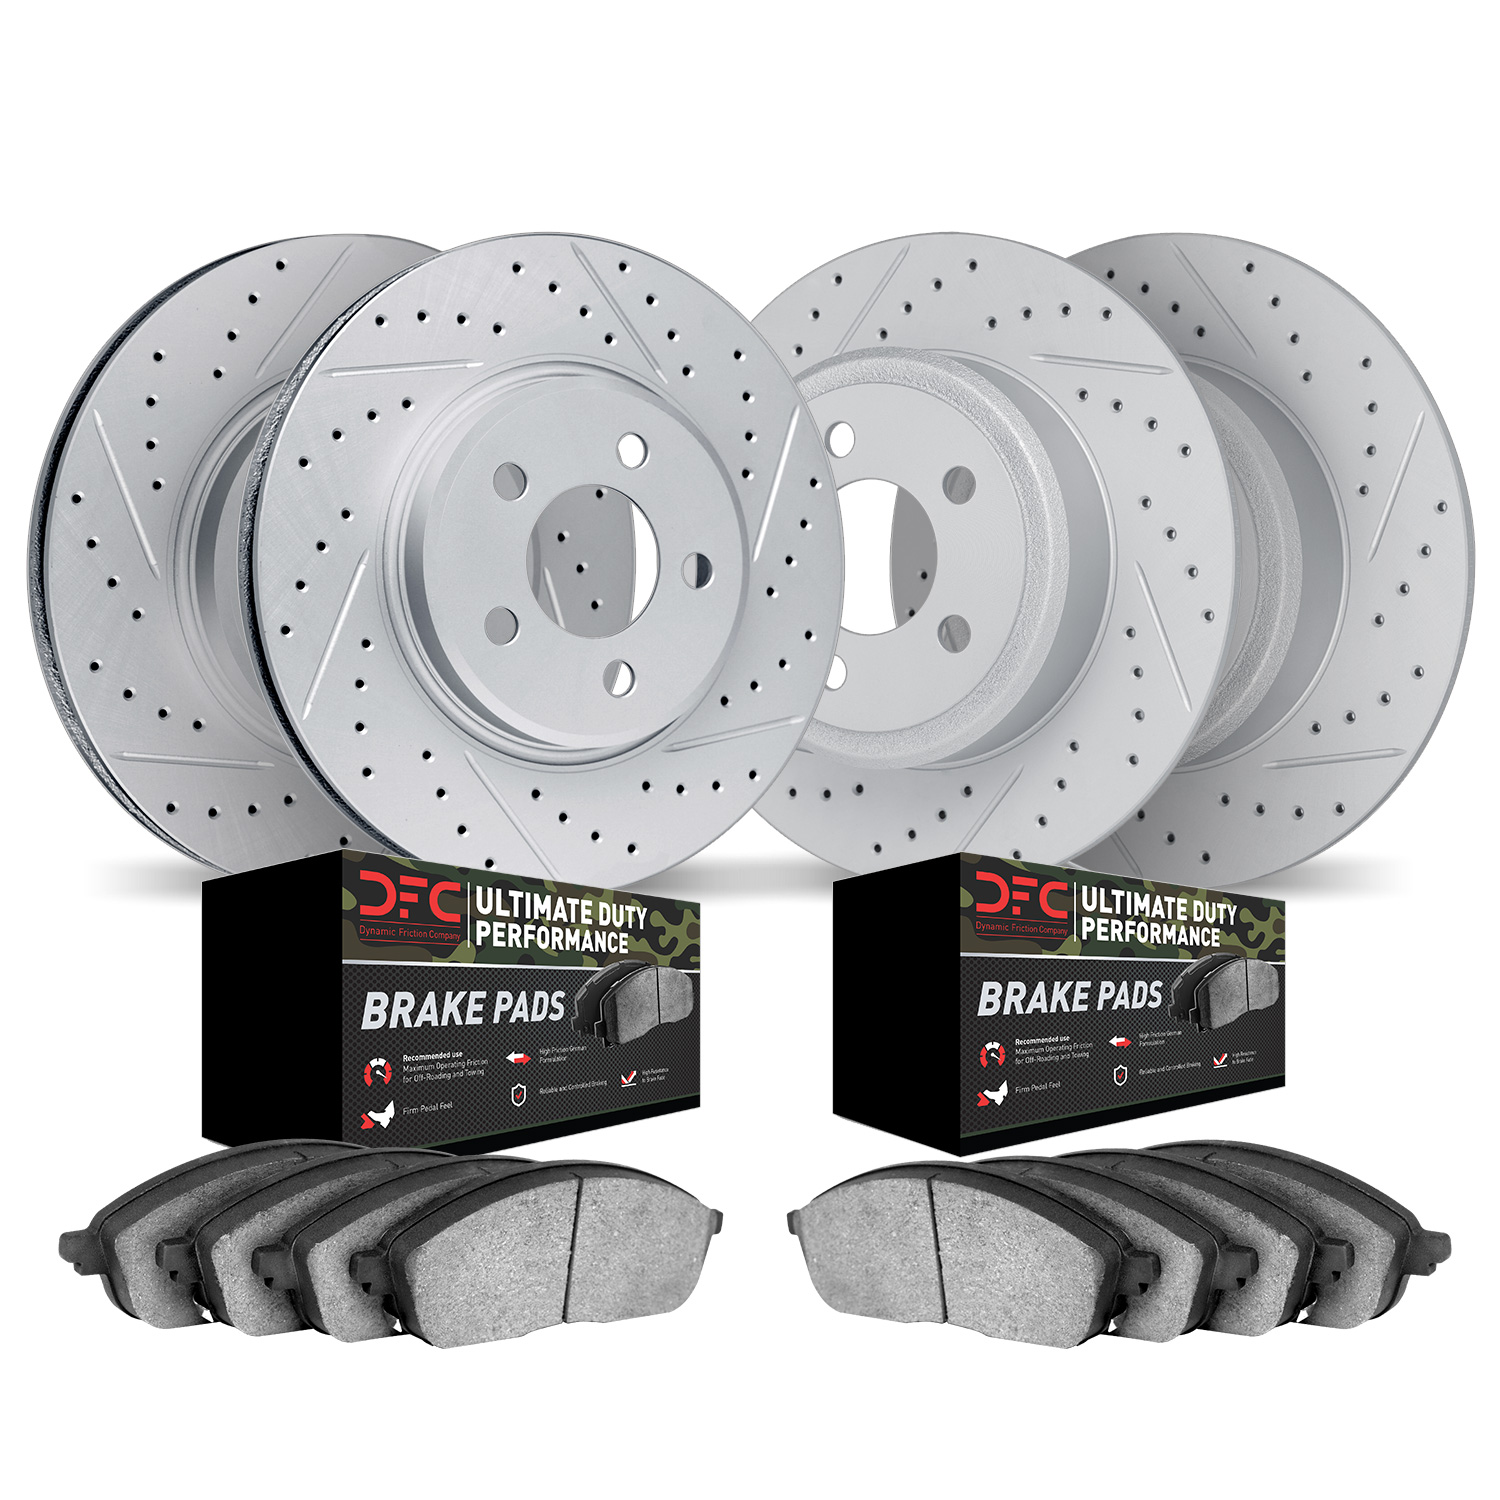 2404-54023 Geoperformance Drilled/Slotted Brake Rotors with Ultimate-Duty Brake Pads Kit, 2002-2005 Ford/Lincoln/Mercury/Mazda,